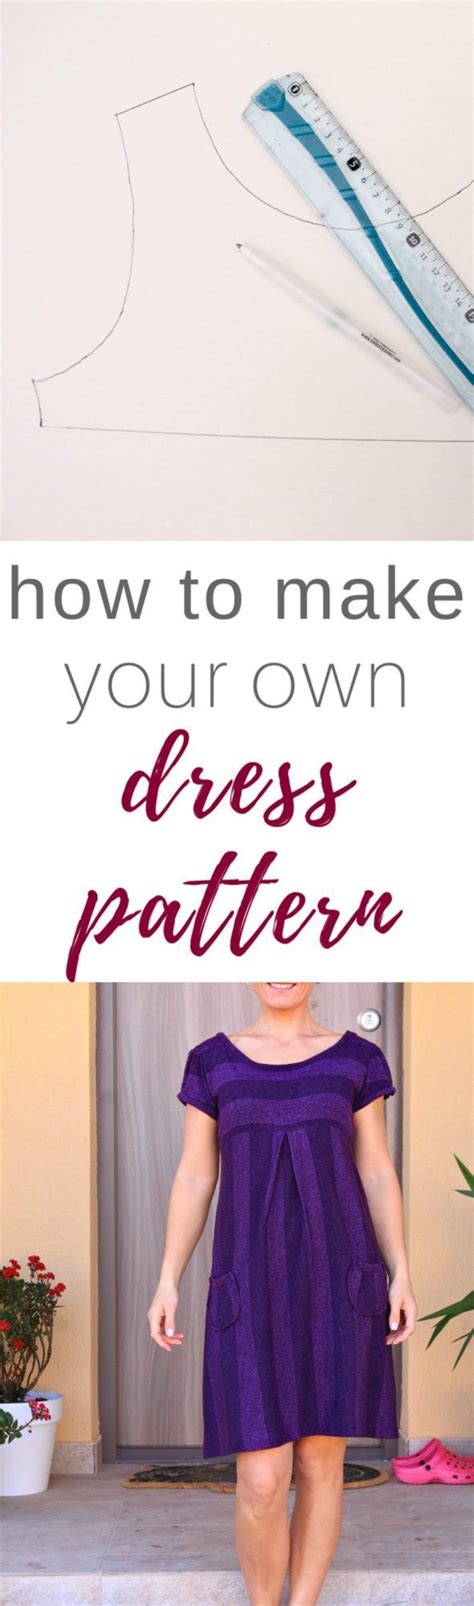 Dress Patter Making Tutorial Ever Wanted To Make Clothes That Fit You